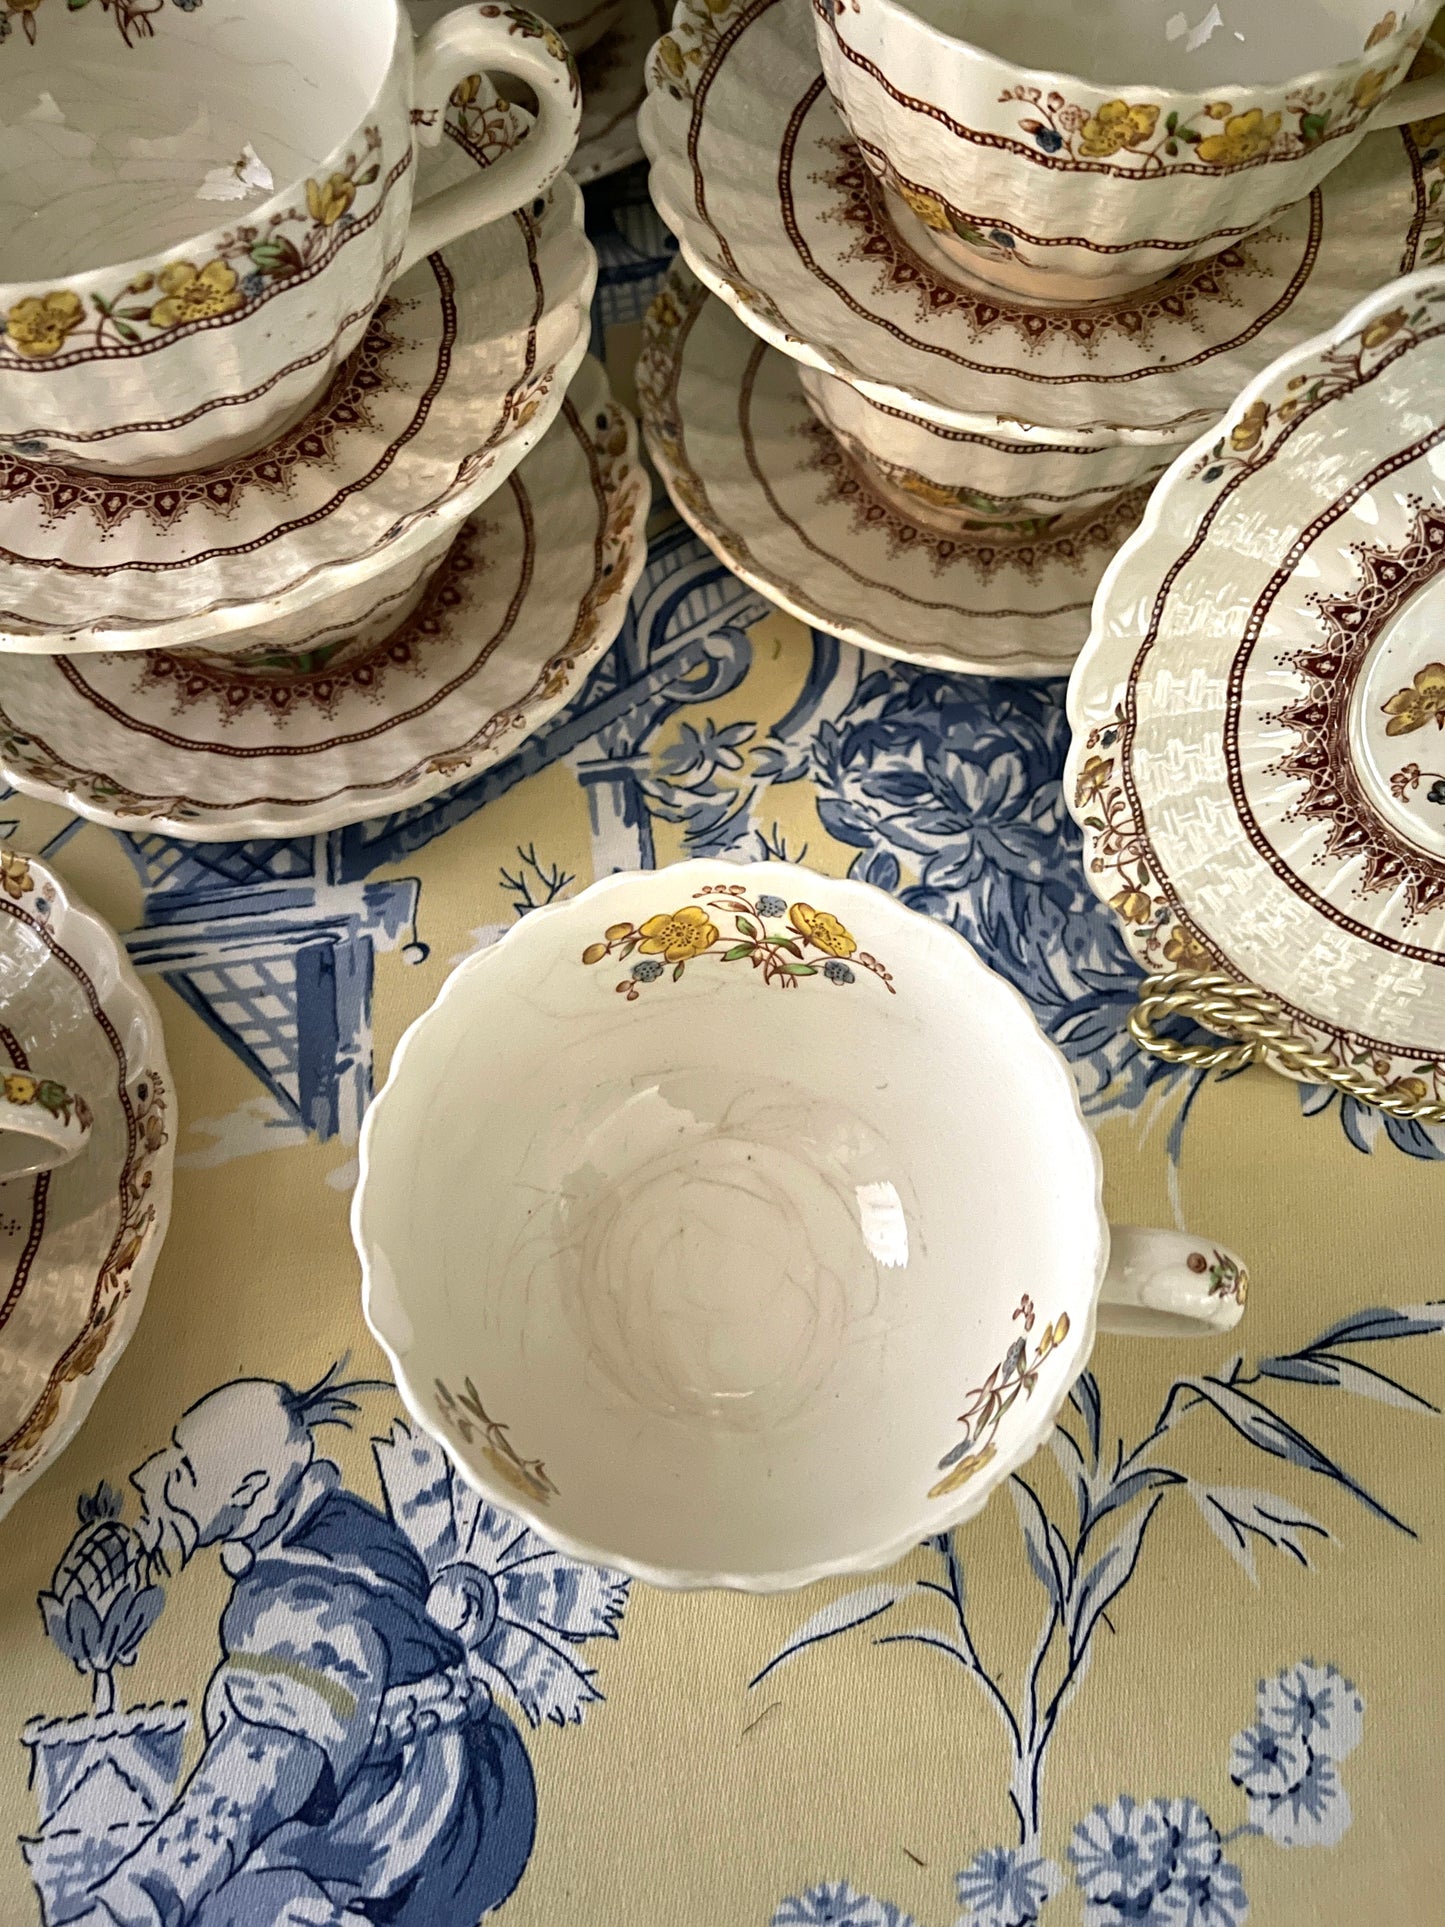 Vintage Copeland Spode Buttercup Cup and Saucer Set-Set includes 6 cups and 6 saucers